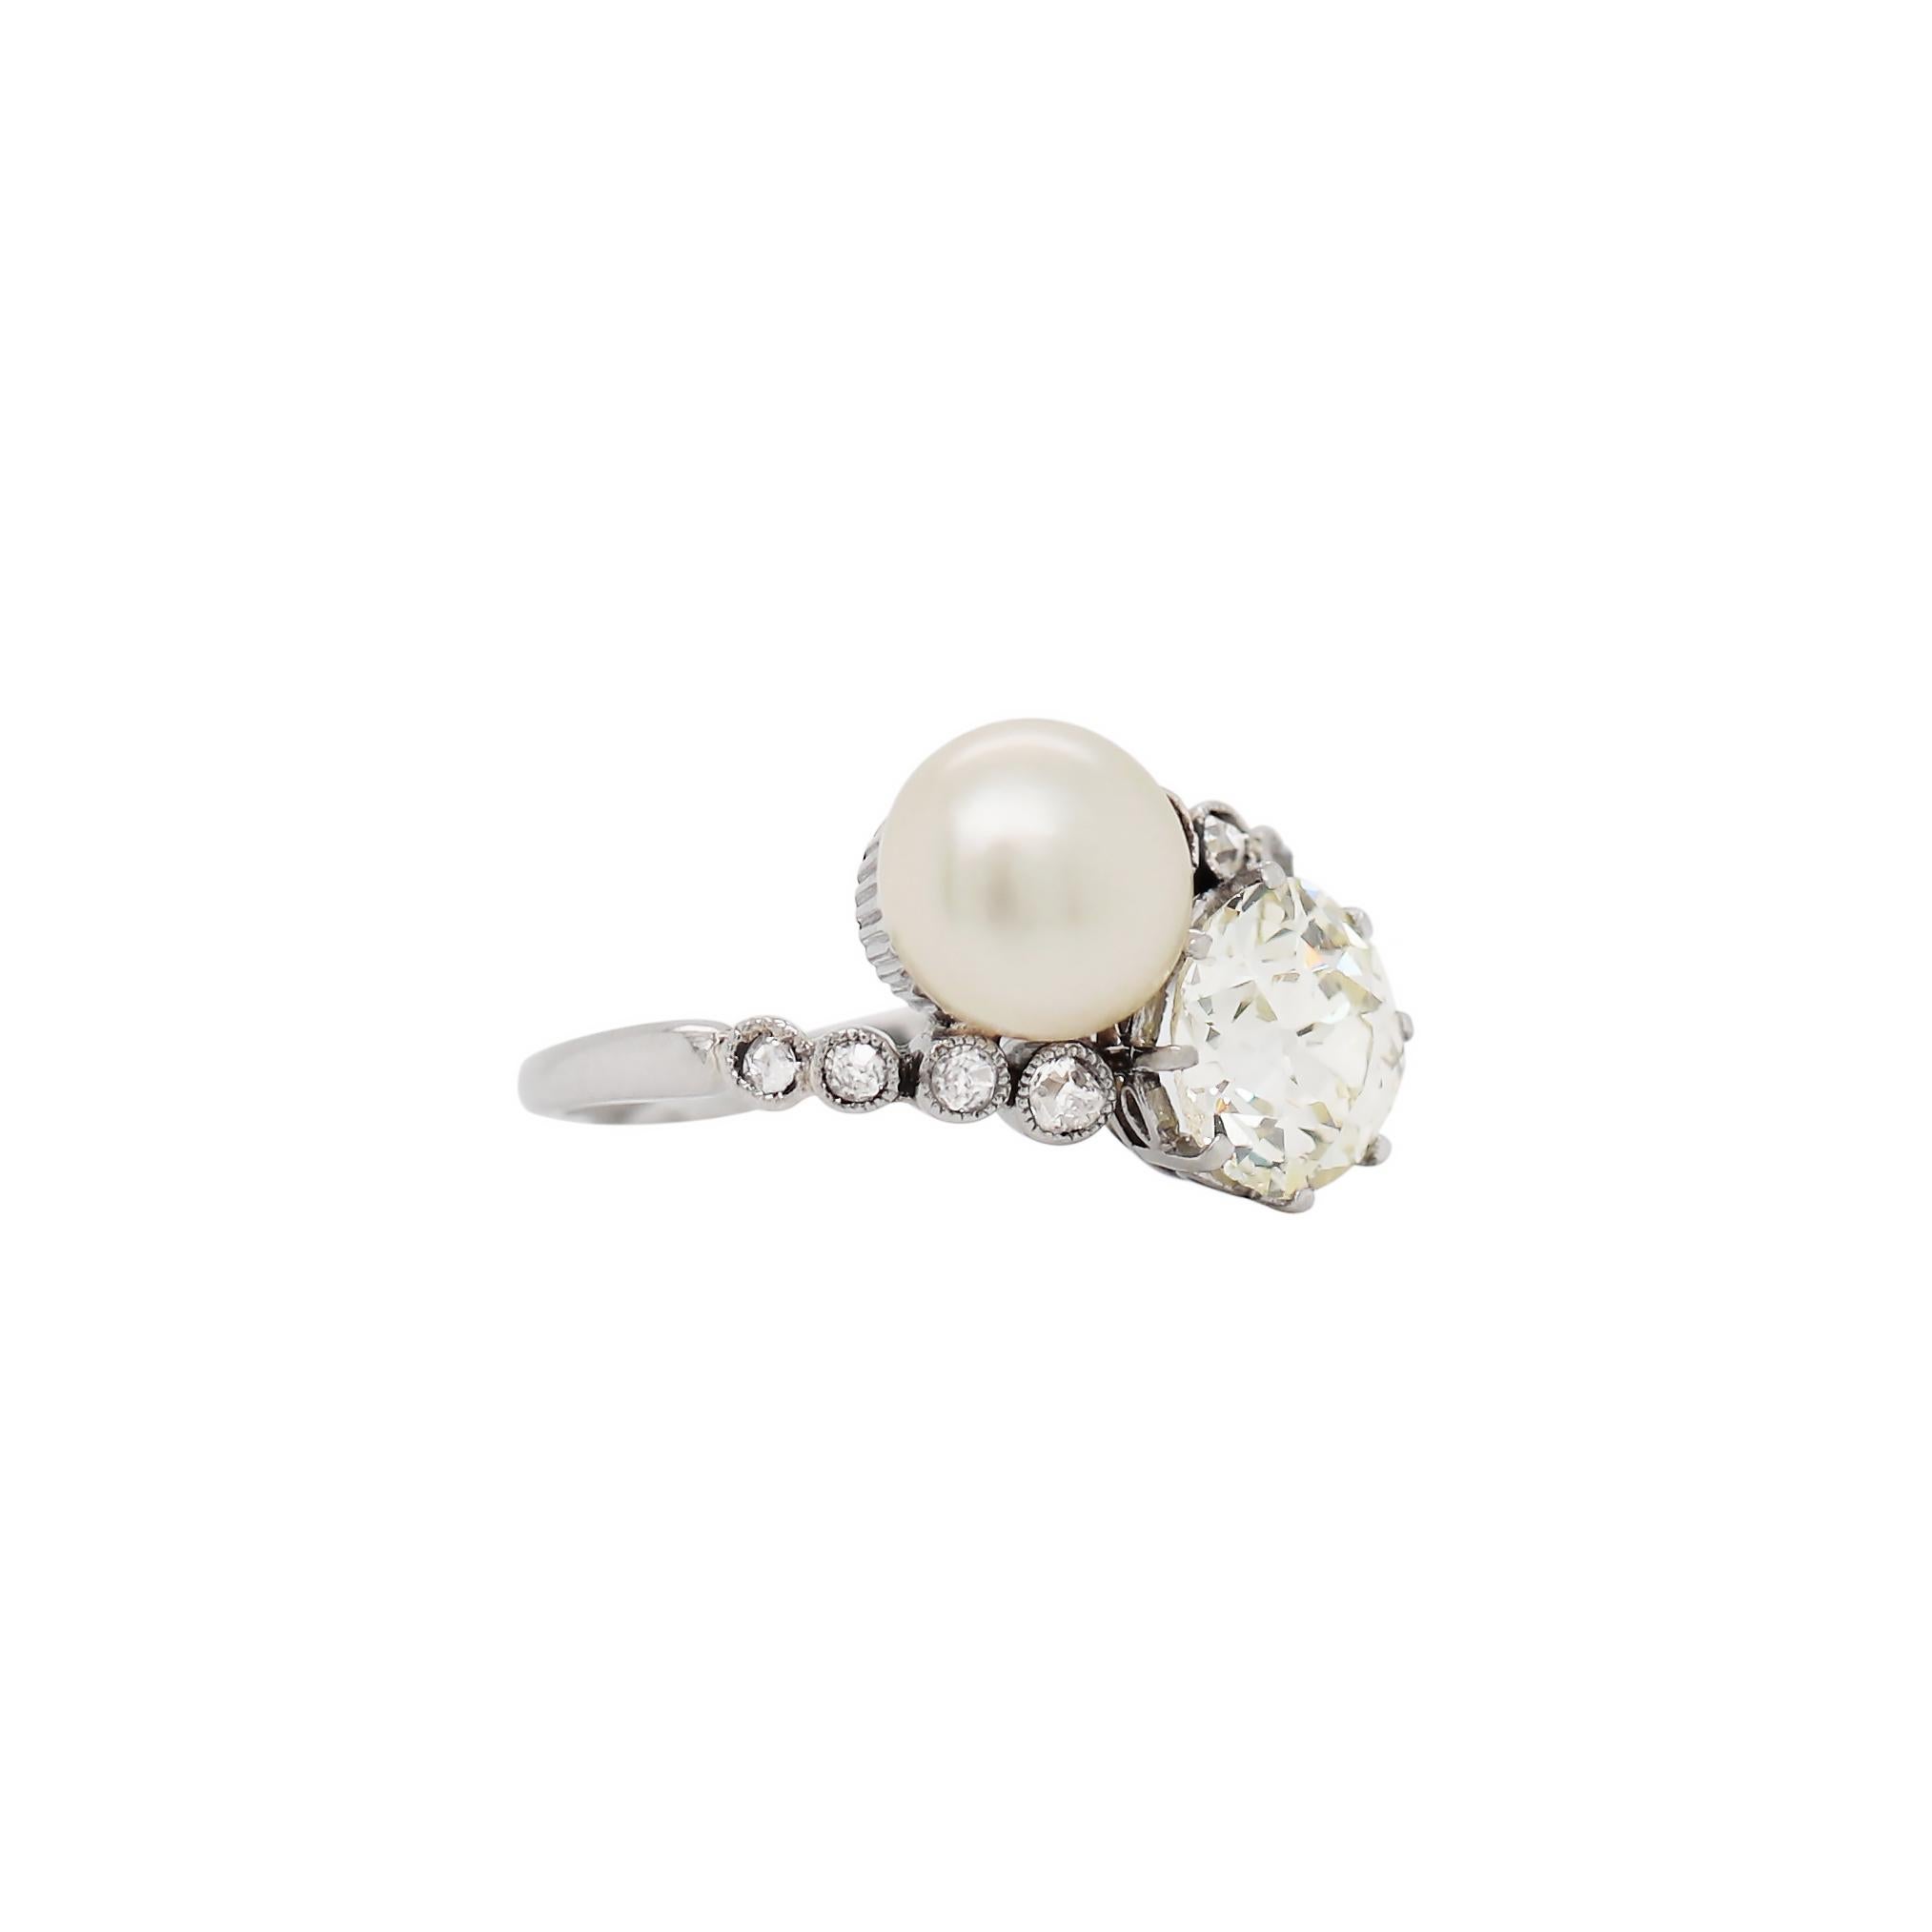 This incredible antique crossover engagement ring features an old cut diamond weighing 1.69ct, set in an eight claw open back setting. The diamond is beautifully accompanied by a natural saltwater button-shaped pearl measuring 7.5mm. The ring is